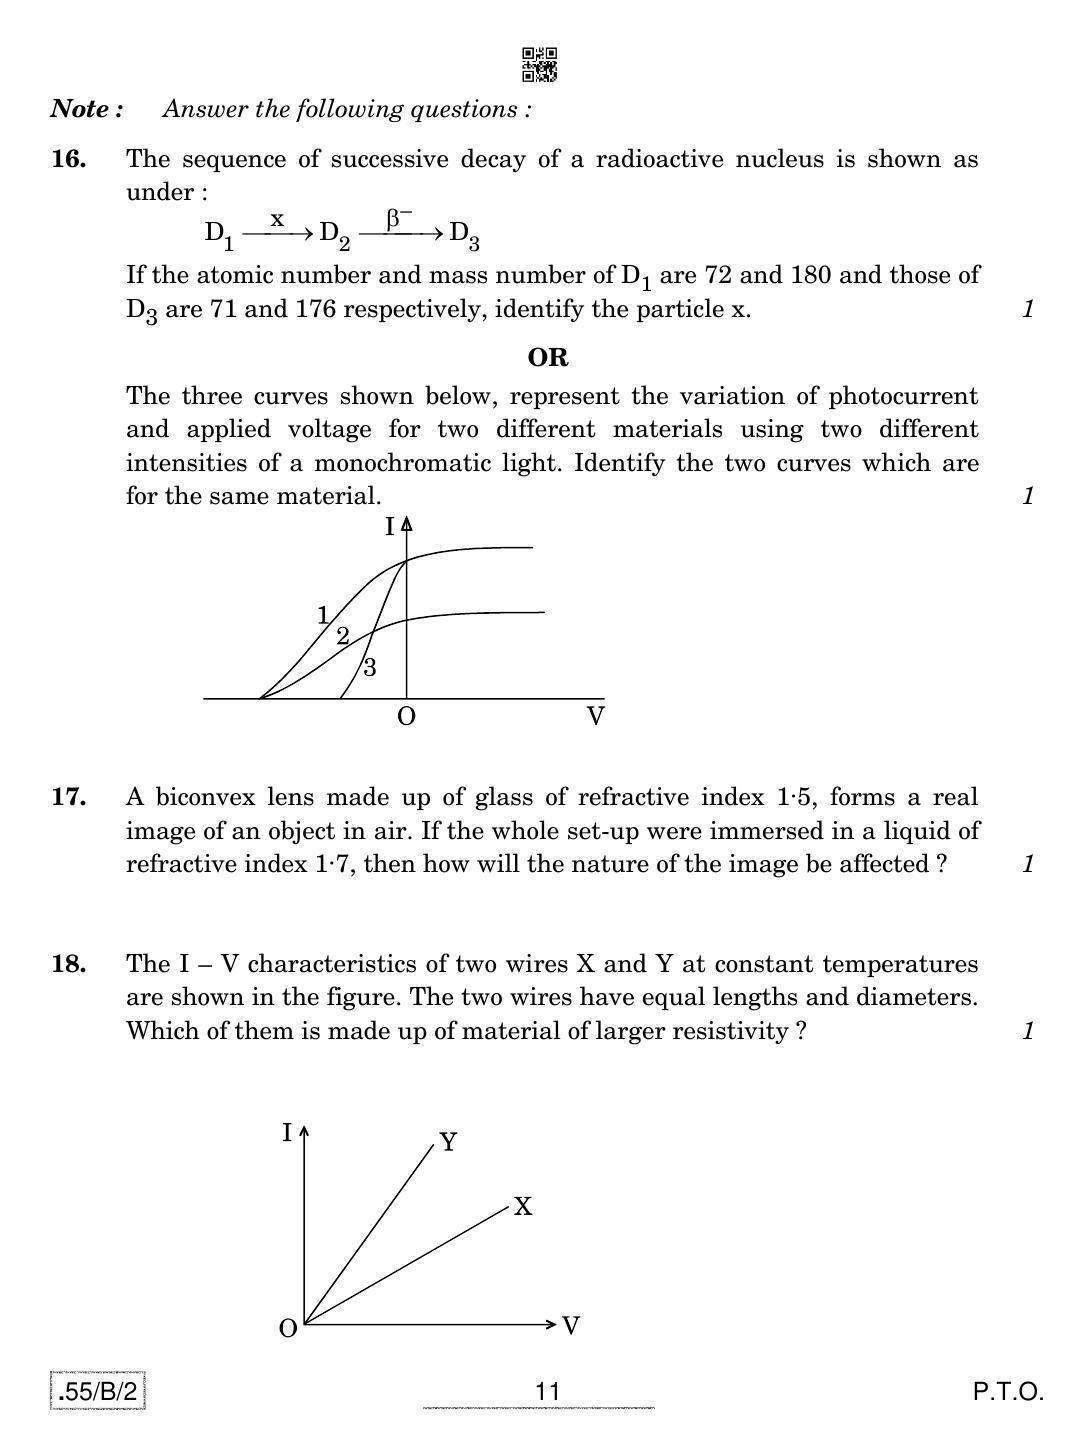 CBSE Class 12 55-C-2 - Physics 2020 Compartment Question Paper - Page 11